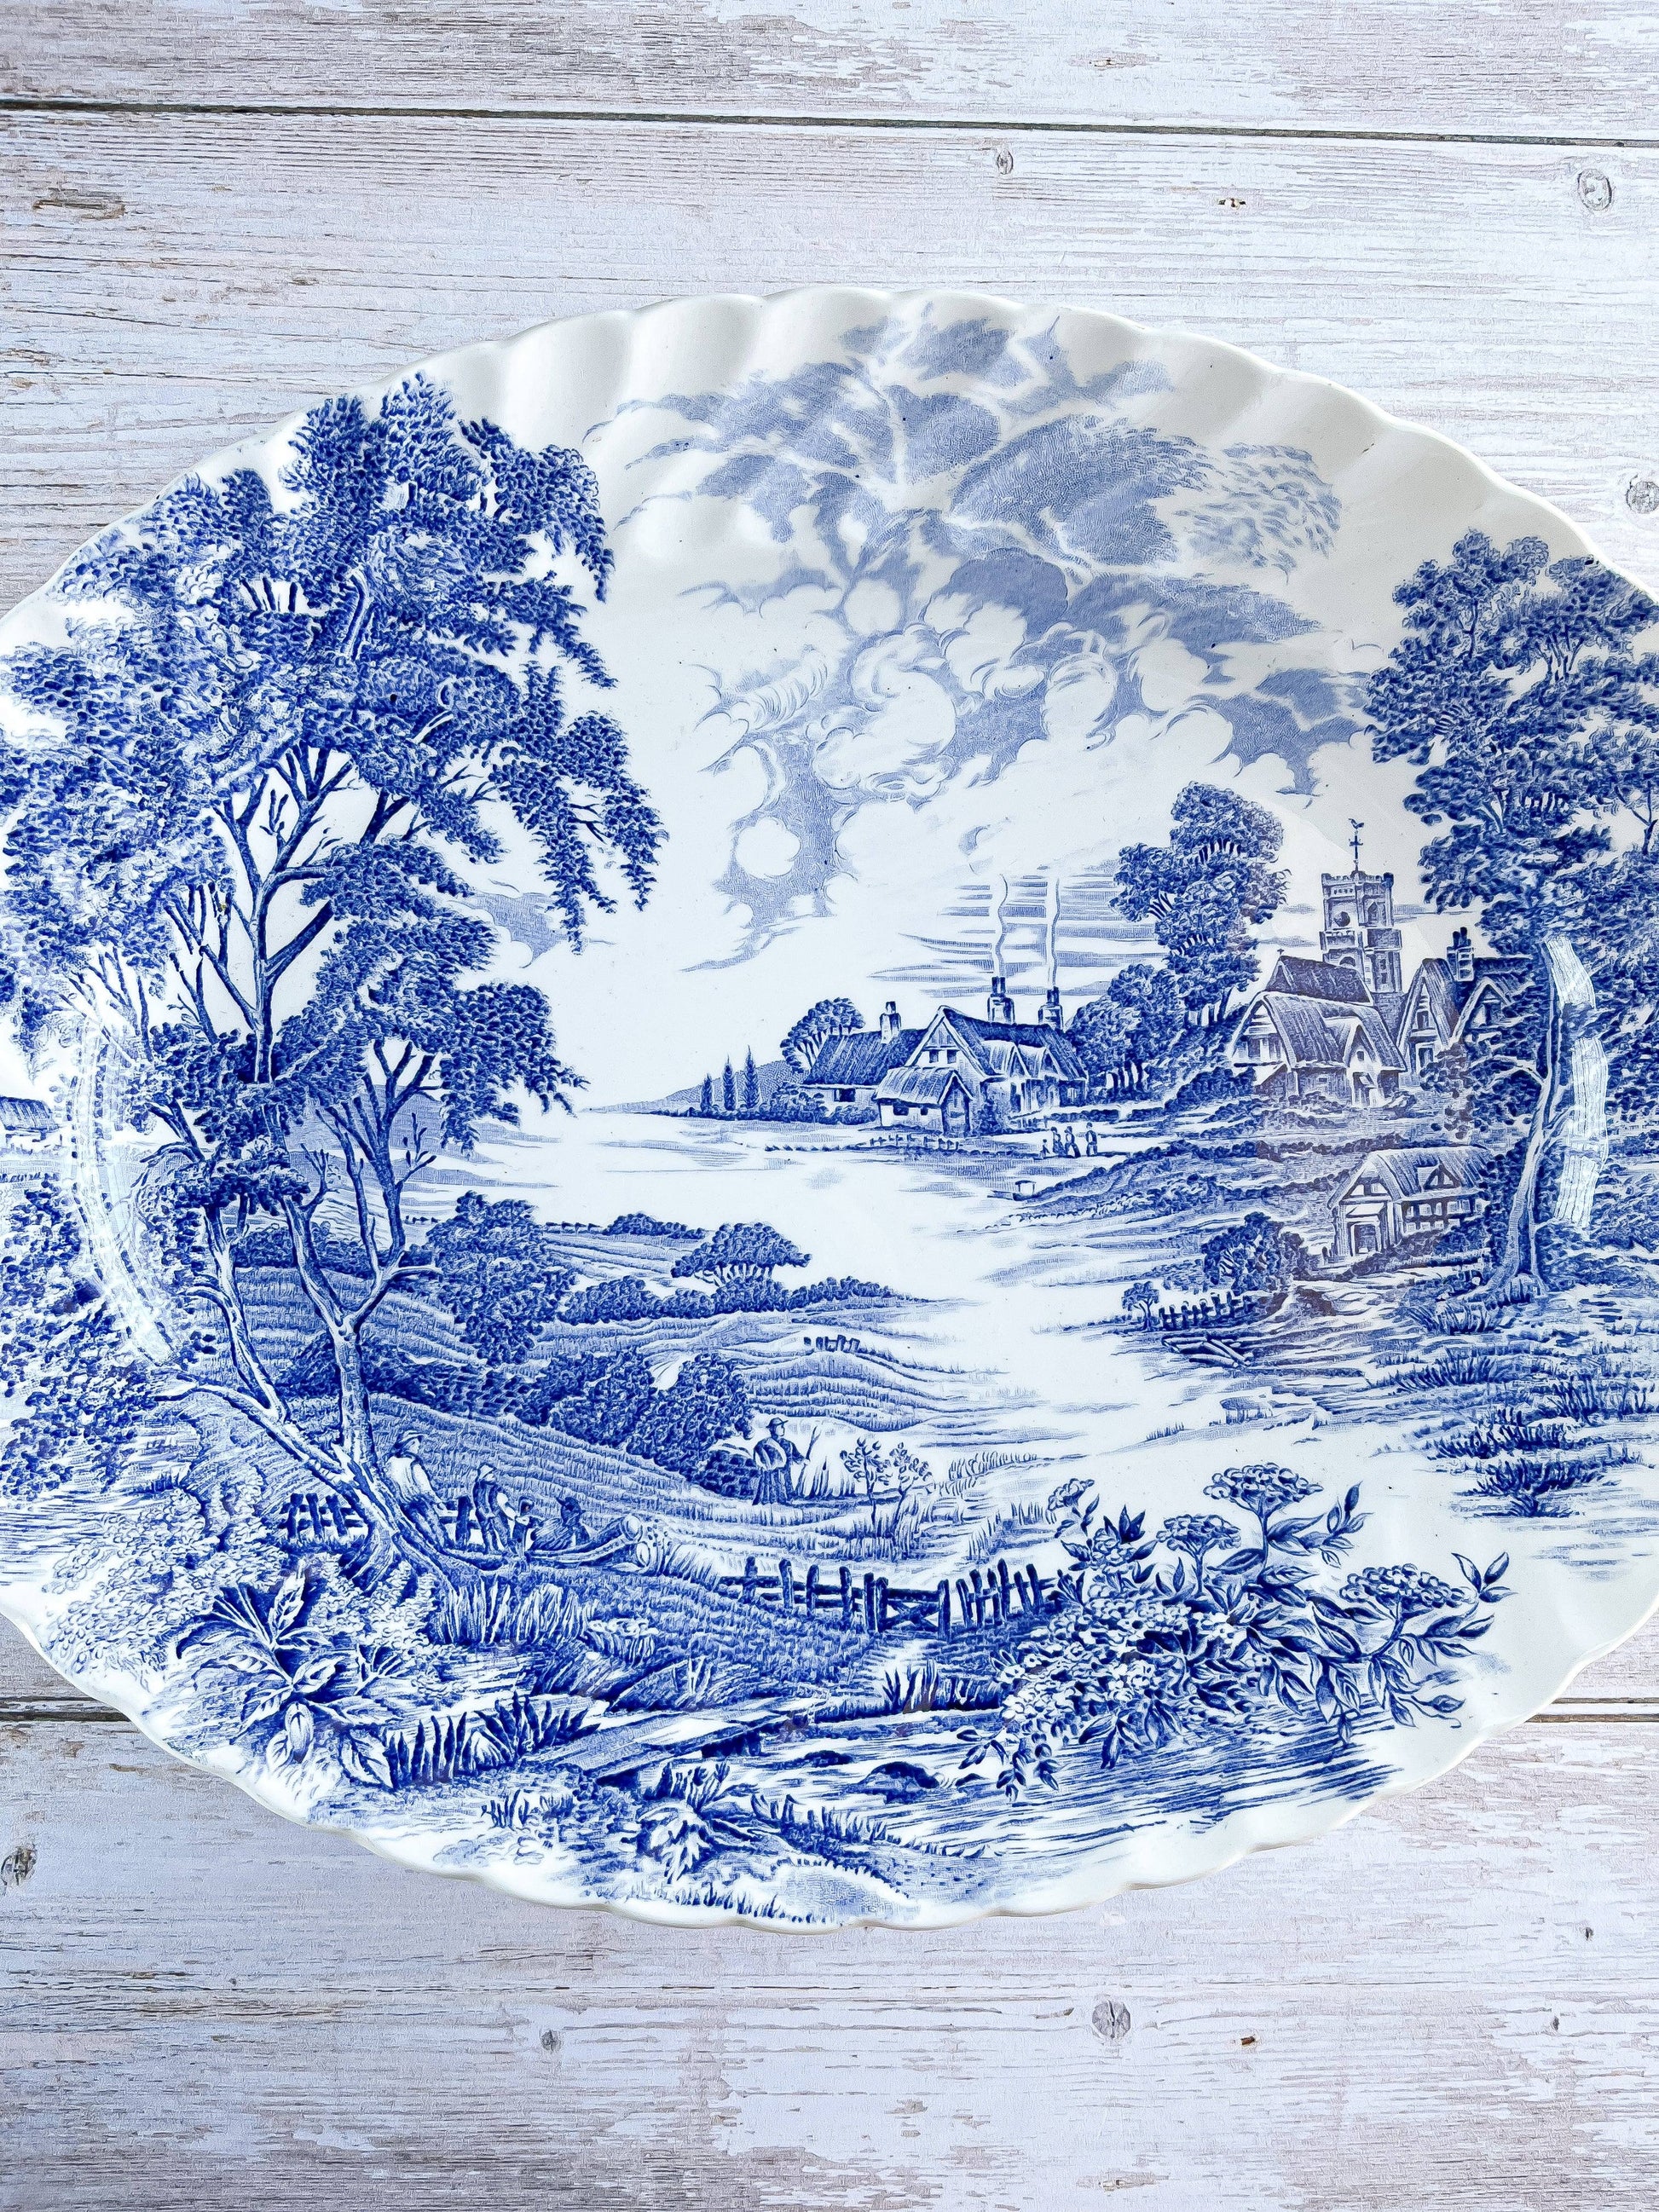 Ridgway Large Oval Serving Platter - ‘Meadowsweet’ in Blue Collection - SOSC Home